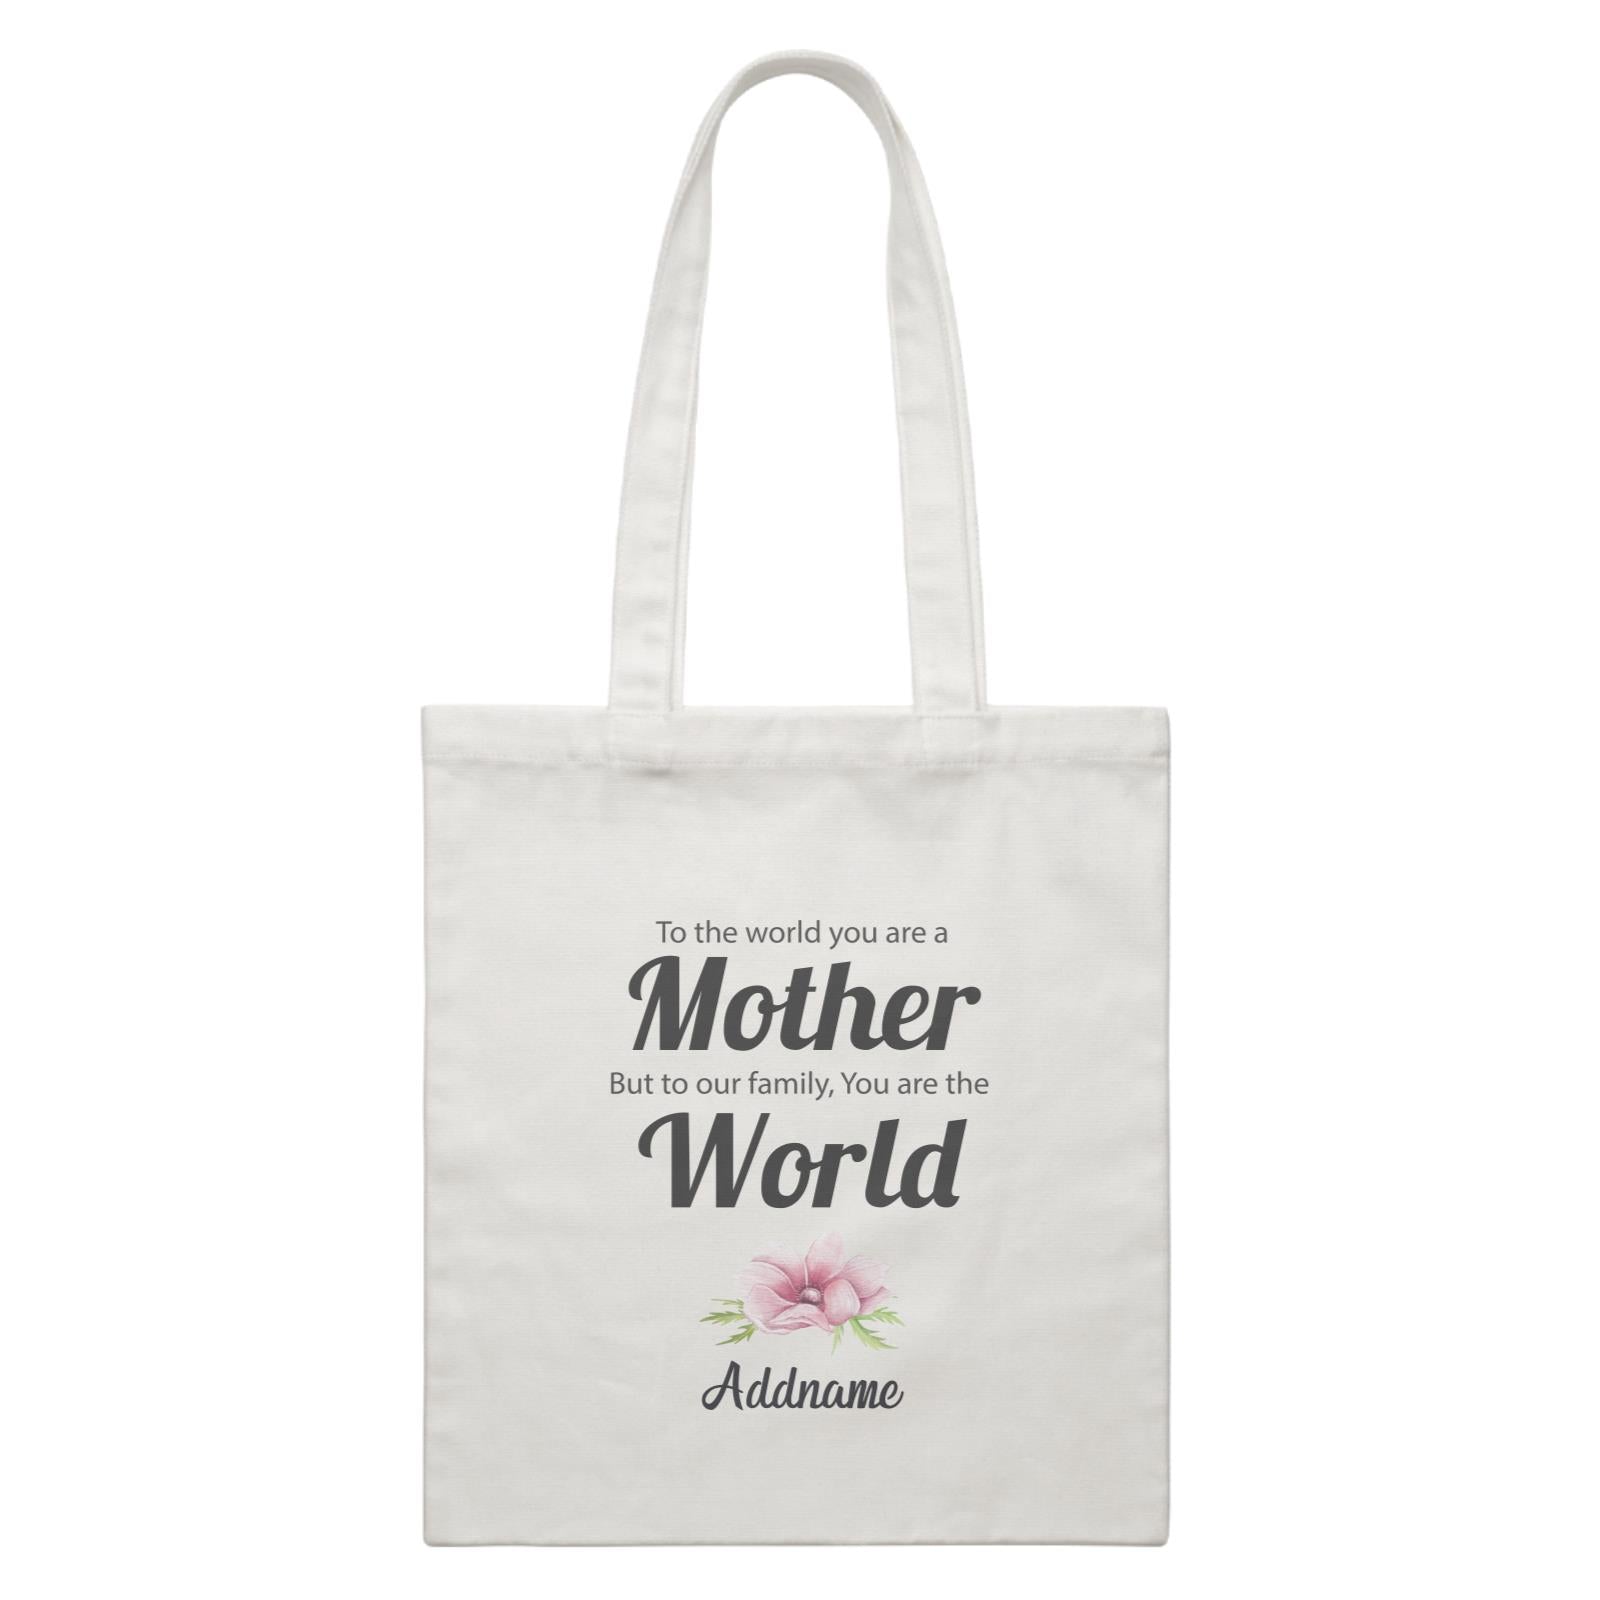 Sweet Mom Quotes 1 To The World You Are A Mother But To Our Family, You Are The World Addname White Canvas Bag